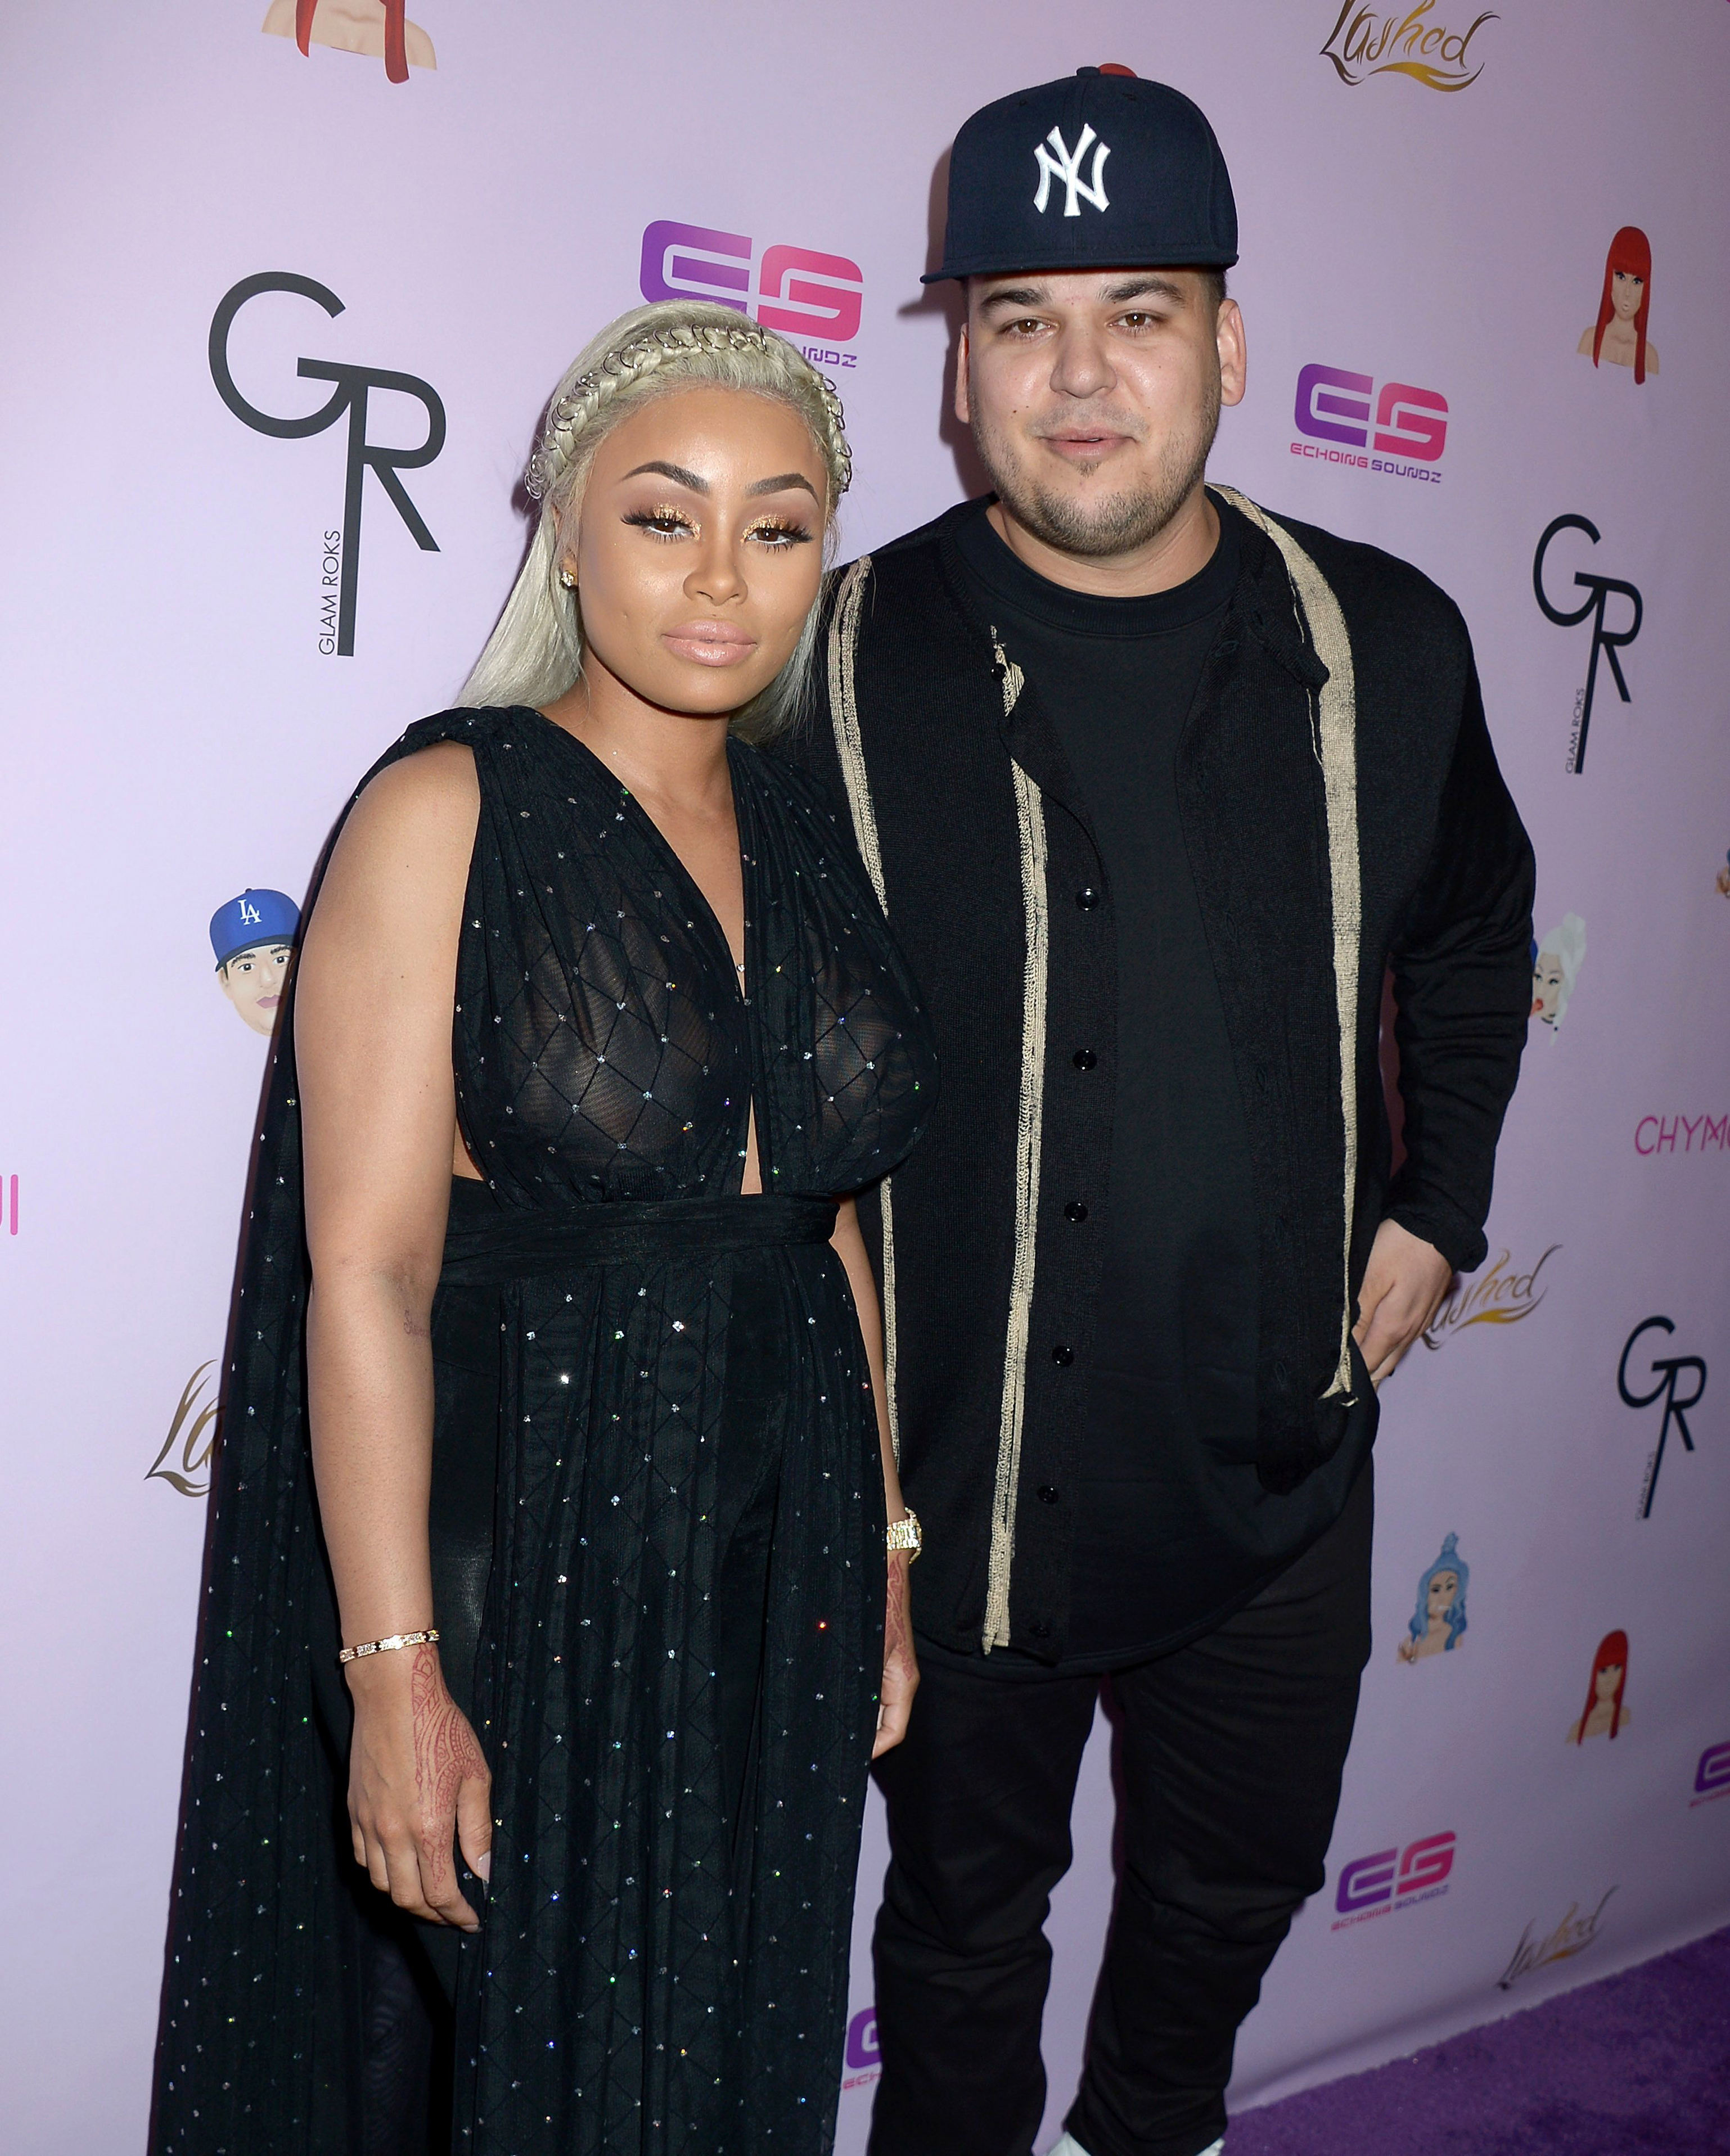 <p>In July 2017, <a href="https://www.wonderwall.com/celebrity/profiles/overview/rob-kardashian-1391.article">Rob Kardashian</a> posted explicit and graphic photos of then-girlfriend Blac Chyna -- pictures she personally sent to him via text -- on Instagram after he accused her of cheating on him. He didn't stop there, though -- he also posted a pic of Chyna with another man along with the caption, "Hahahaha Chyna just sent me this video saying happy 4th of July what a crazy person." </p>